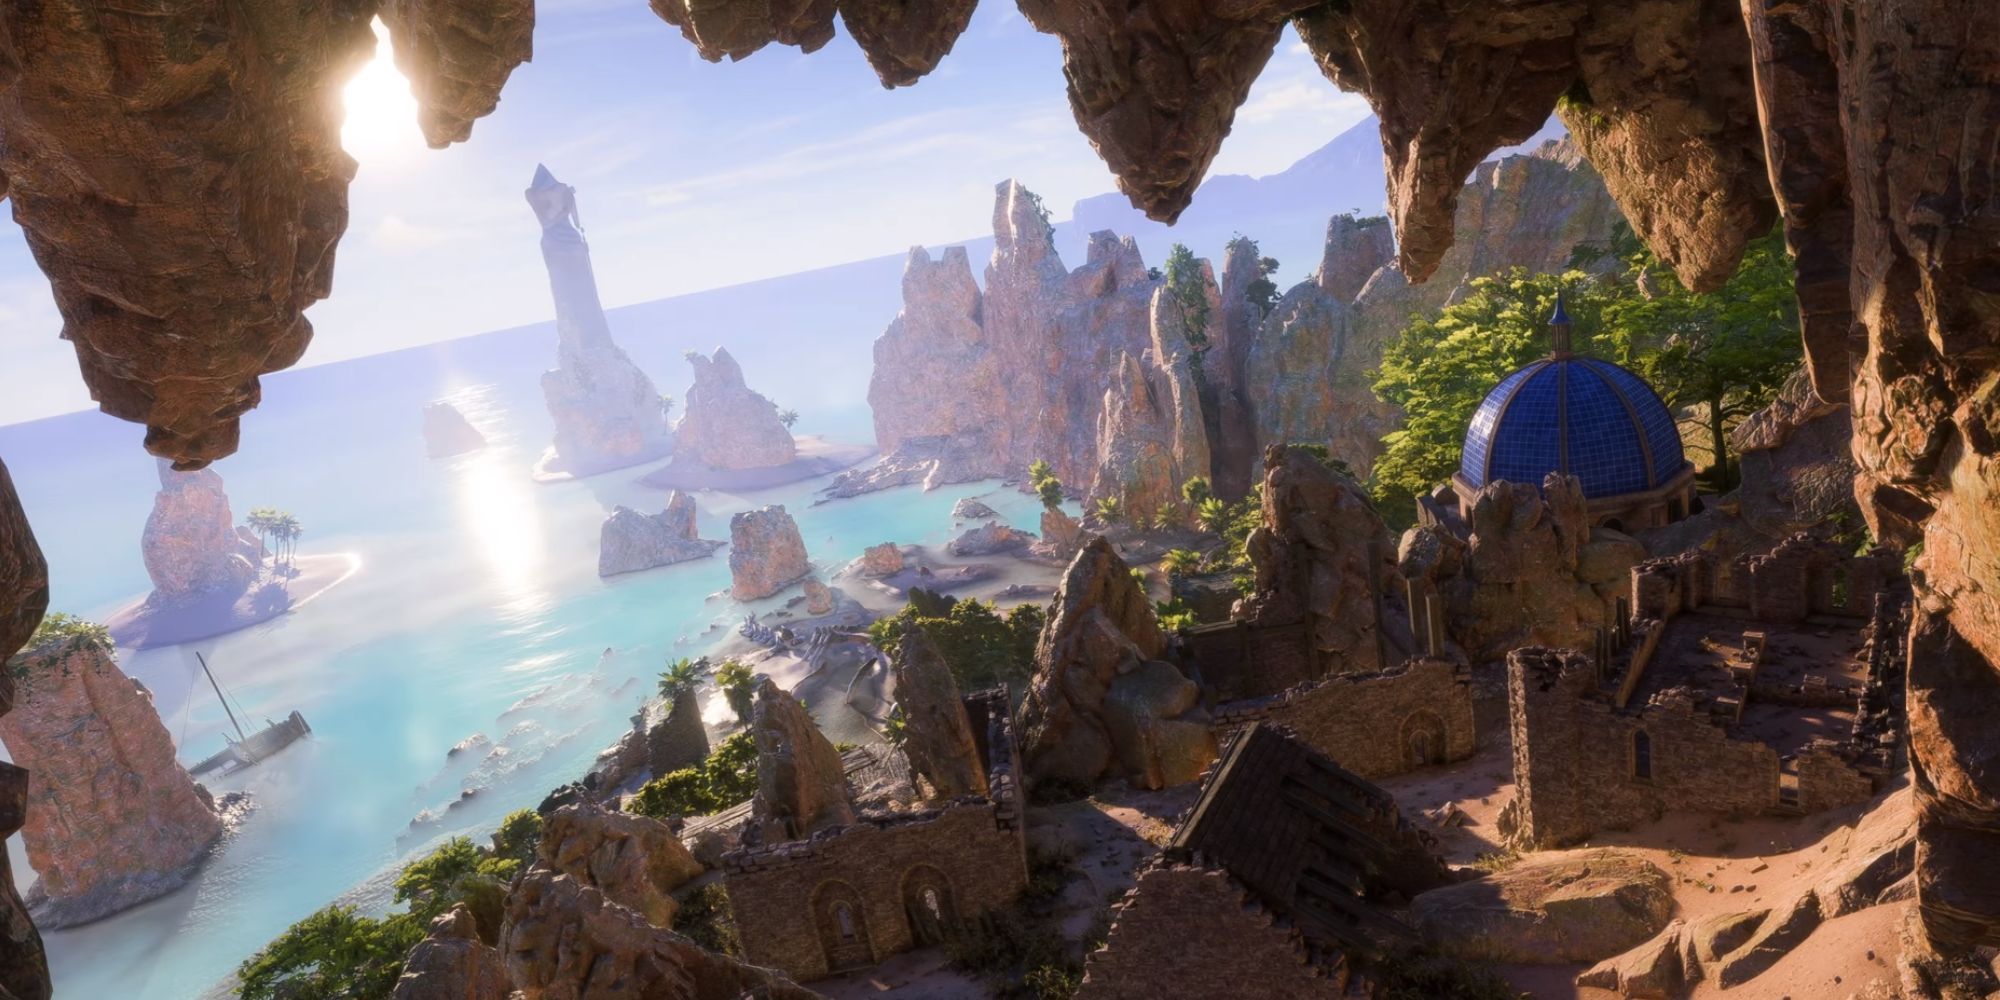 A new sunny location with ruins in the Dragon Age Dreadwolf teaser